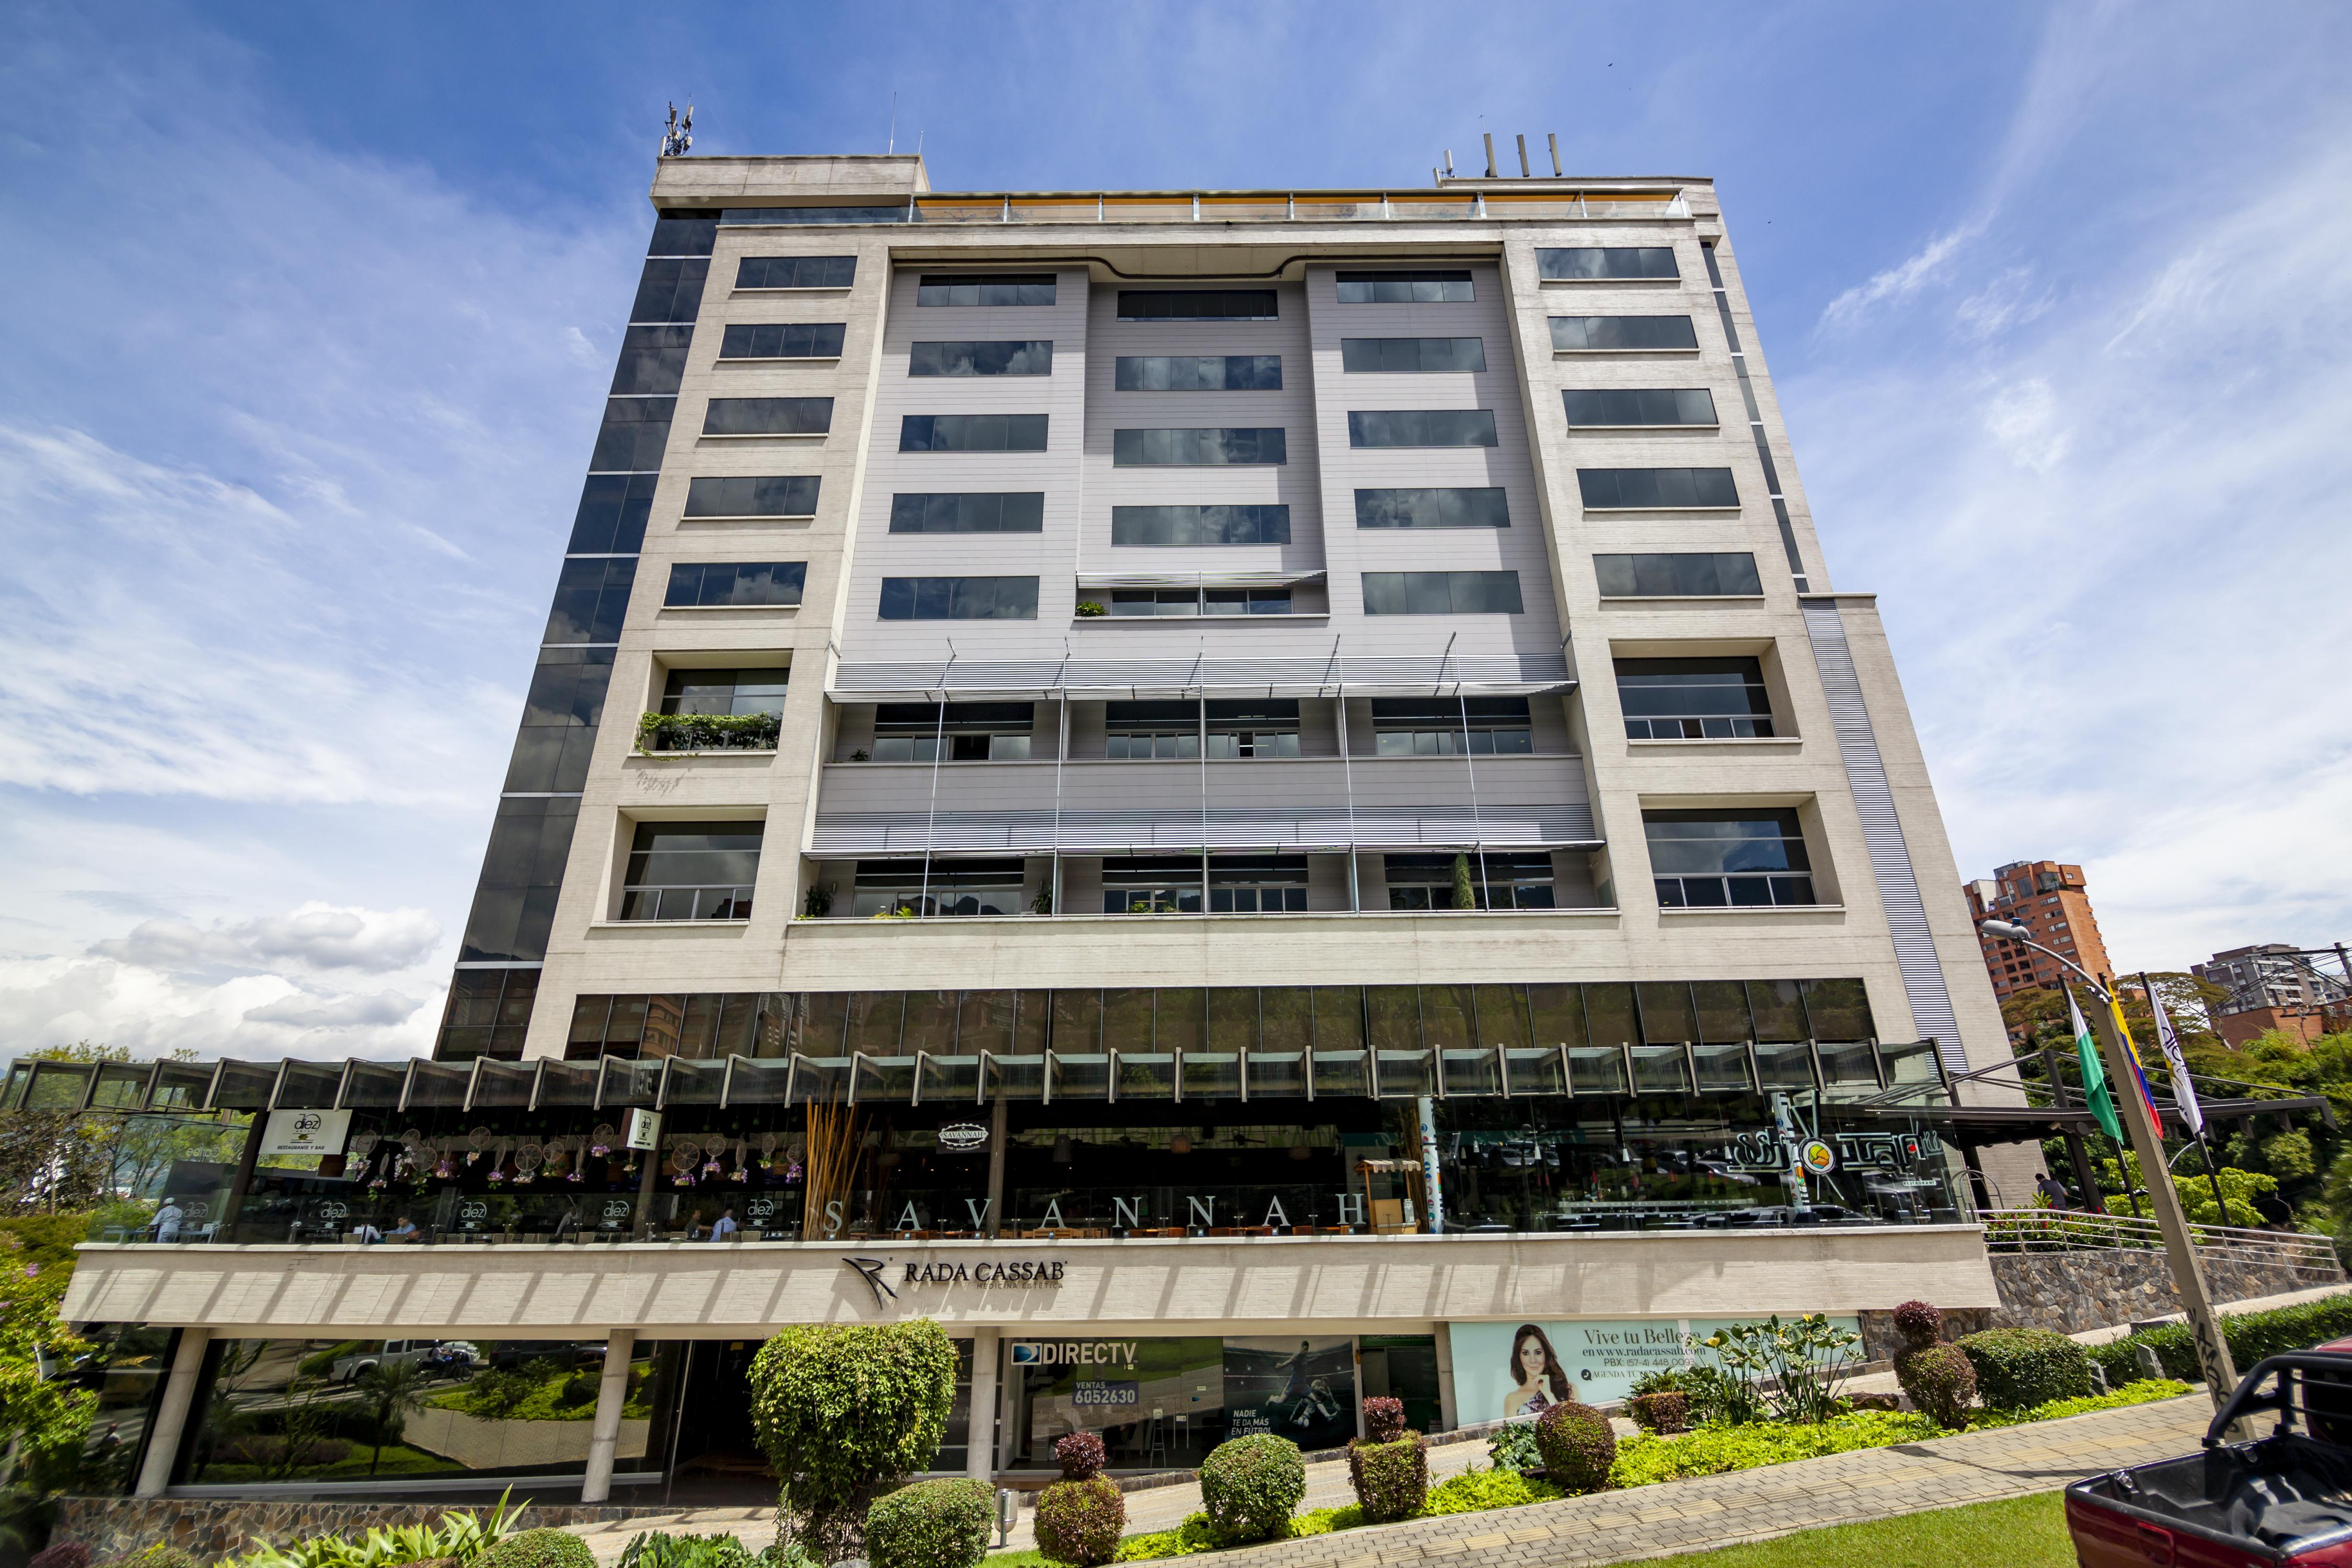 DIEZ HOTEL CATEGORIA COLOMBIA MEDELLIN 5* (Colombia) - from US$ 76 | BOOKED